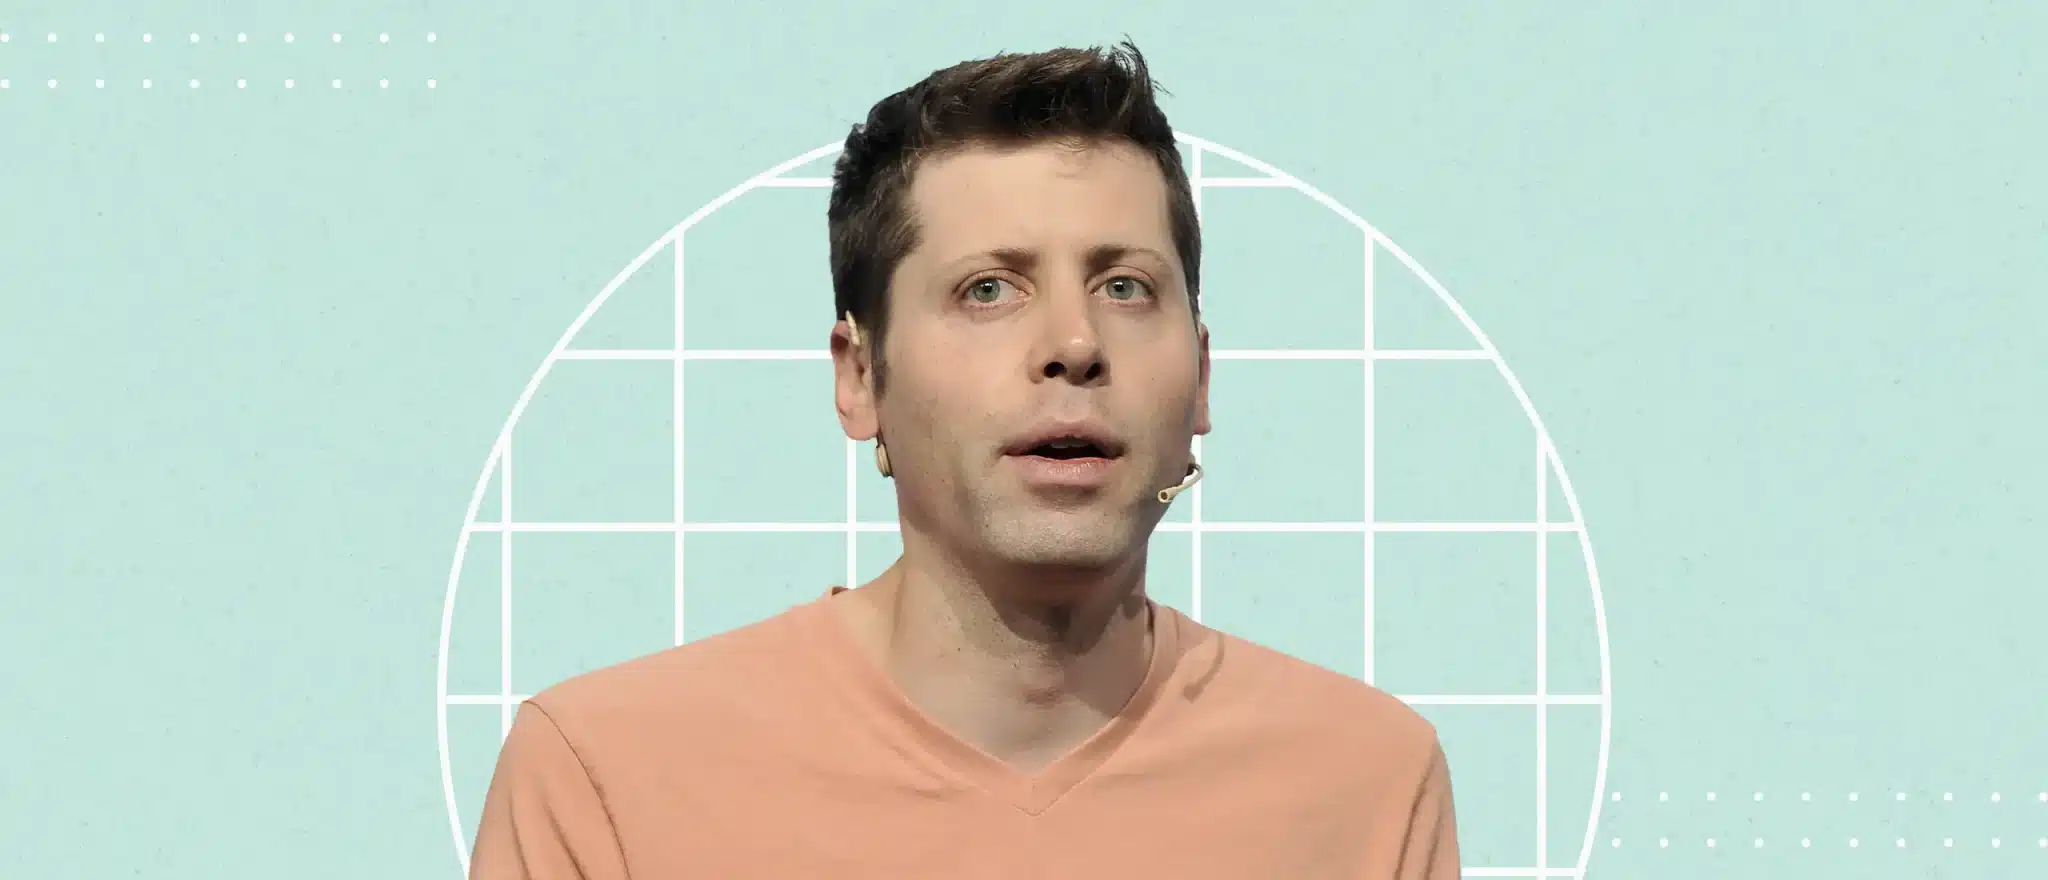 Unlike Responses From His Software, ChatGPT CEO Sam Altman’s Anti-Aging Routine Might be Worth Copying